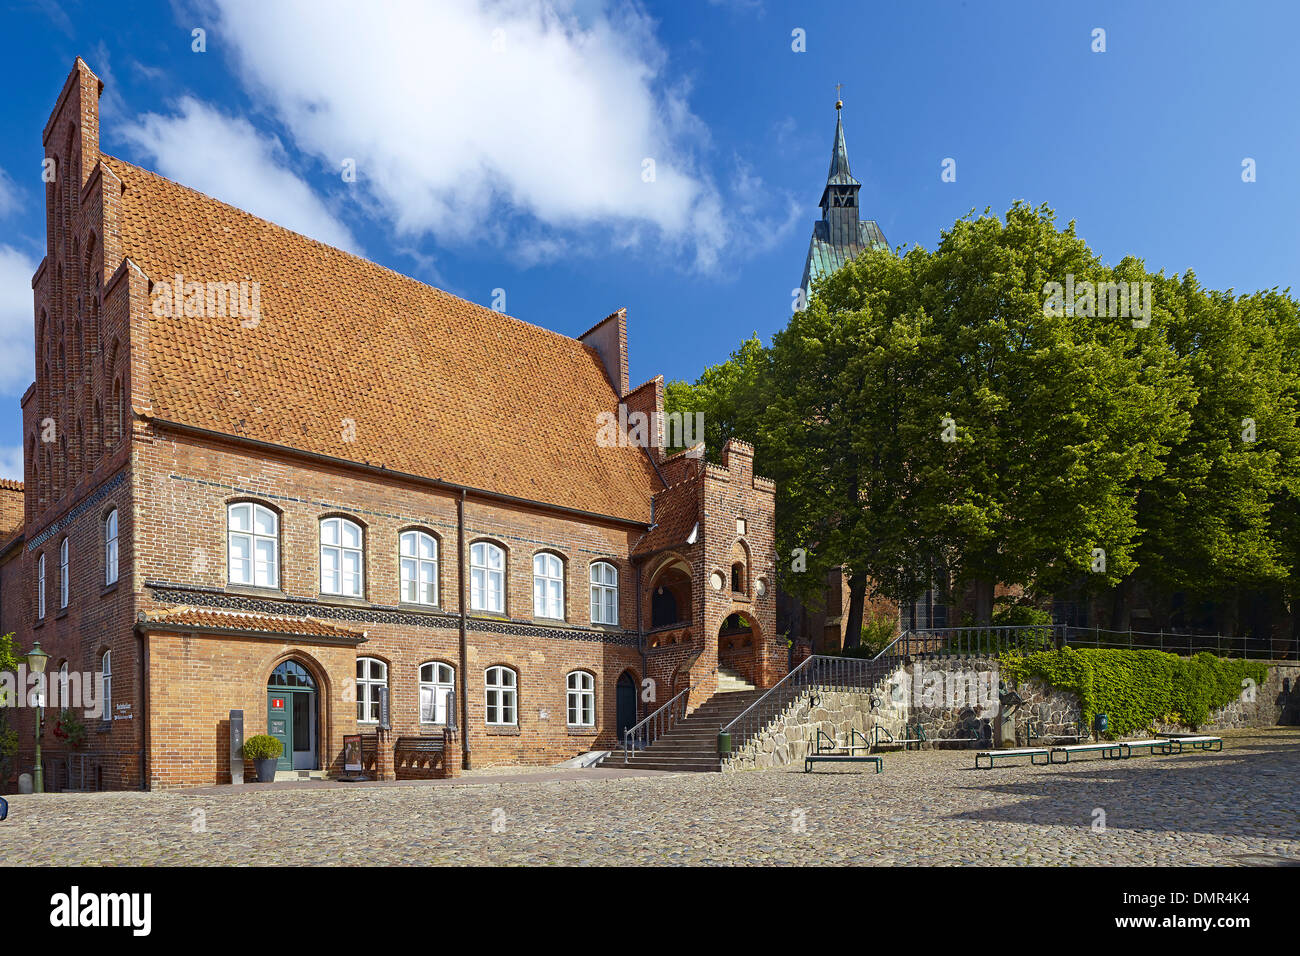 City Hall and Church of St. Nicholas at marketplace in Mölln, Herzogtum Lauenburg, Schleswig-Holstein, Germany Stock Photo